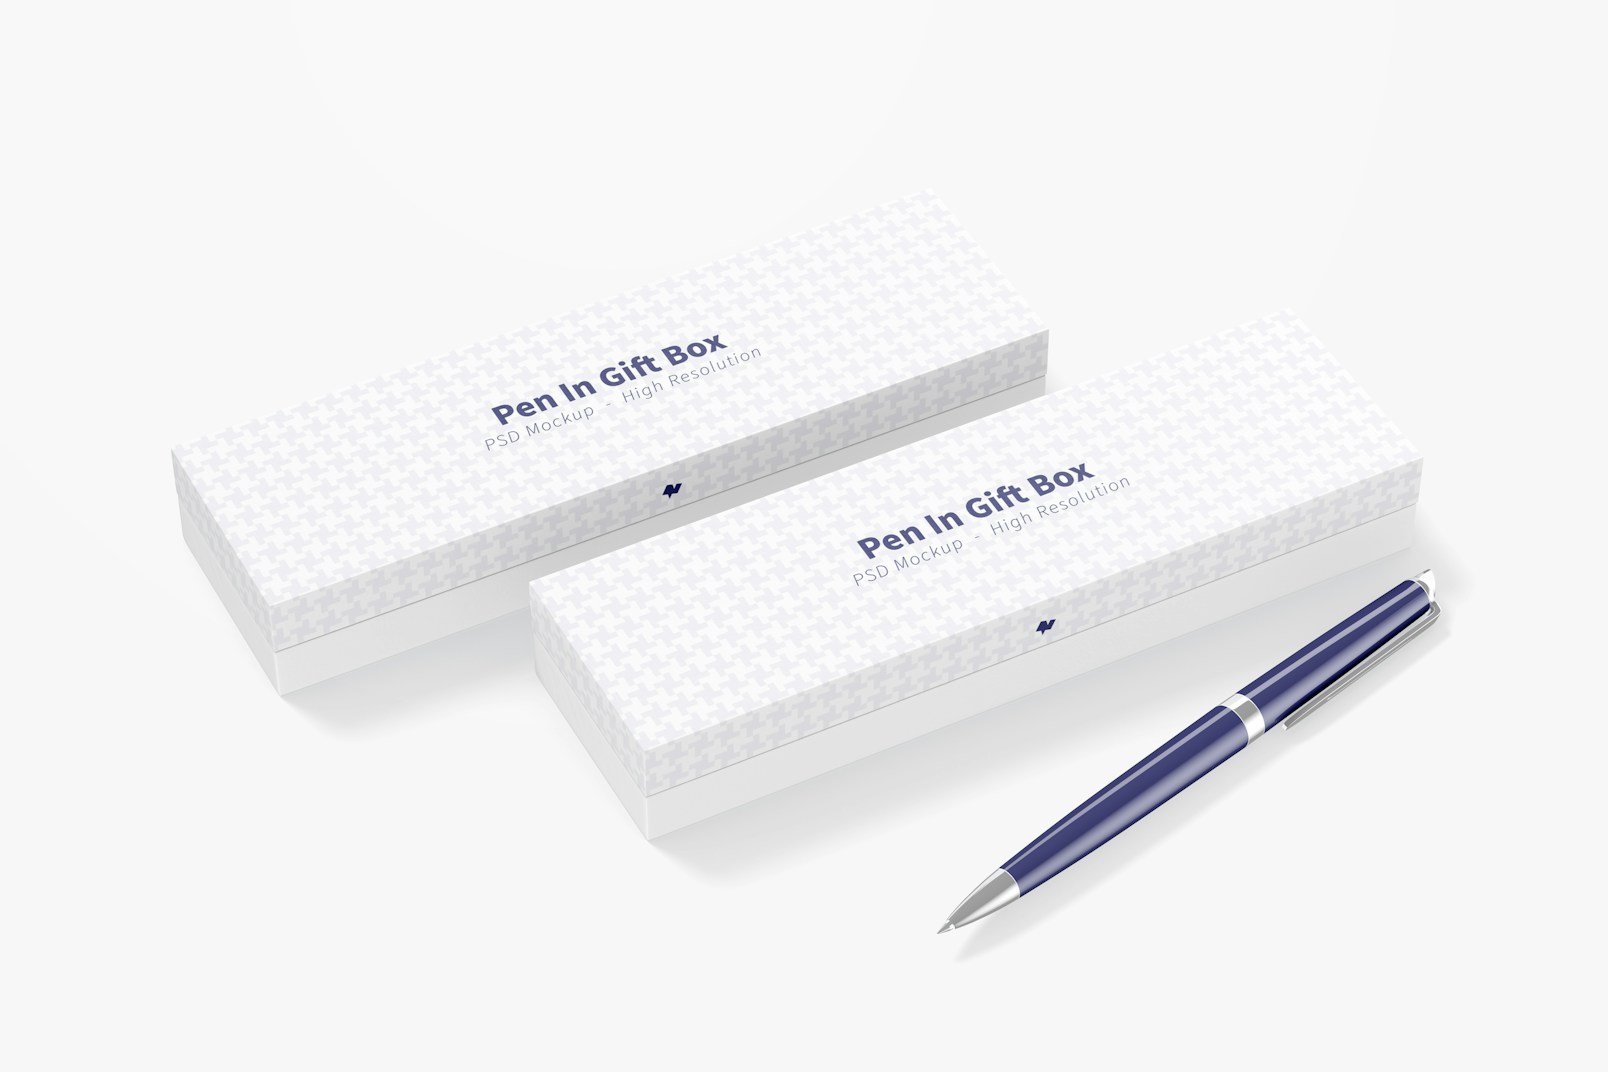 Pen In Gift Boxes Mockup, Perspective